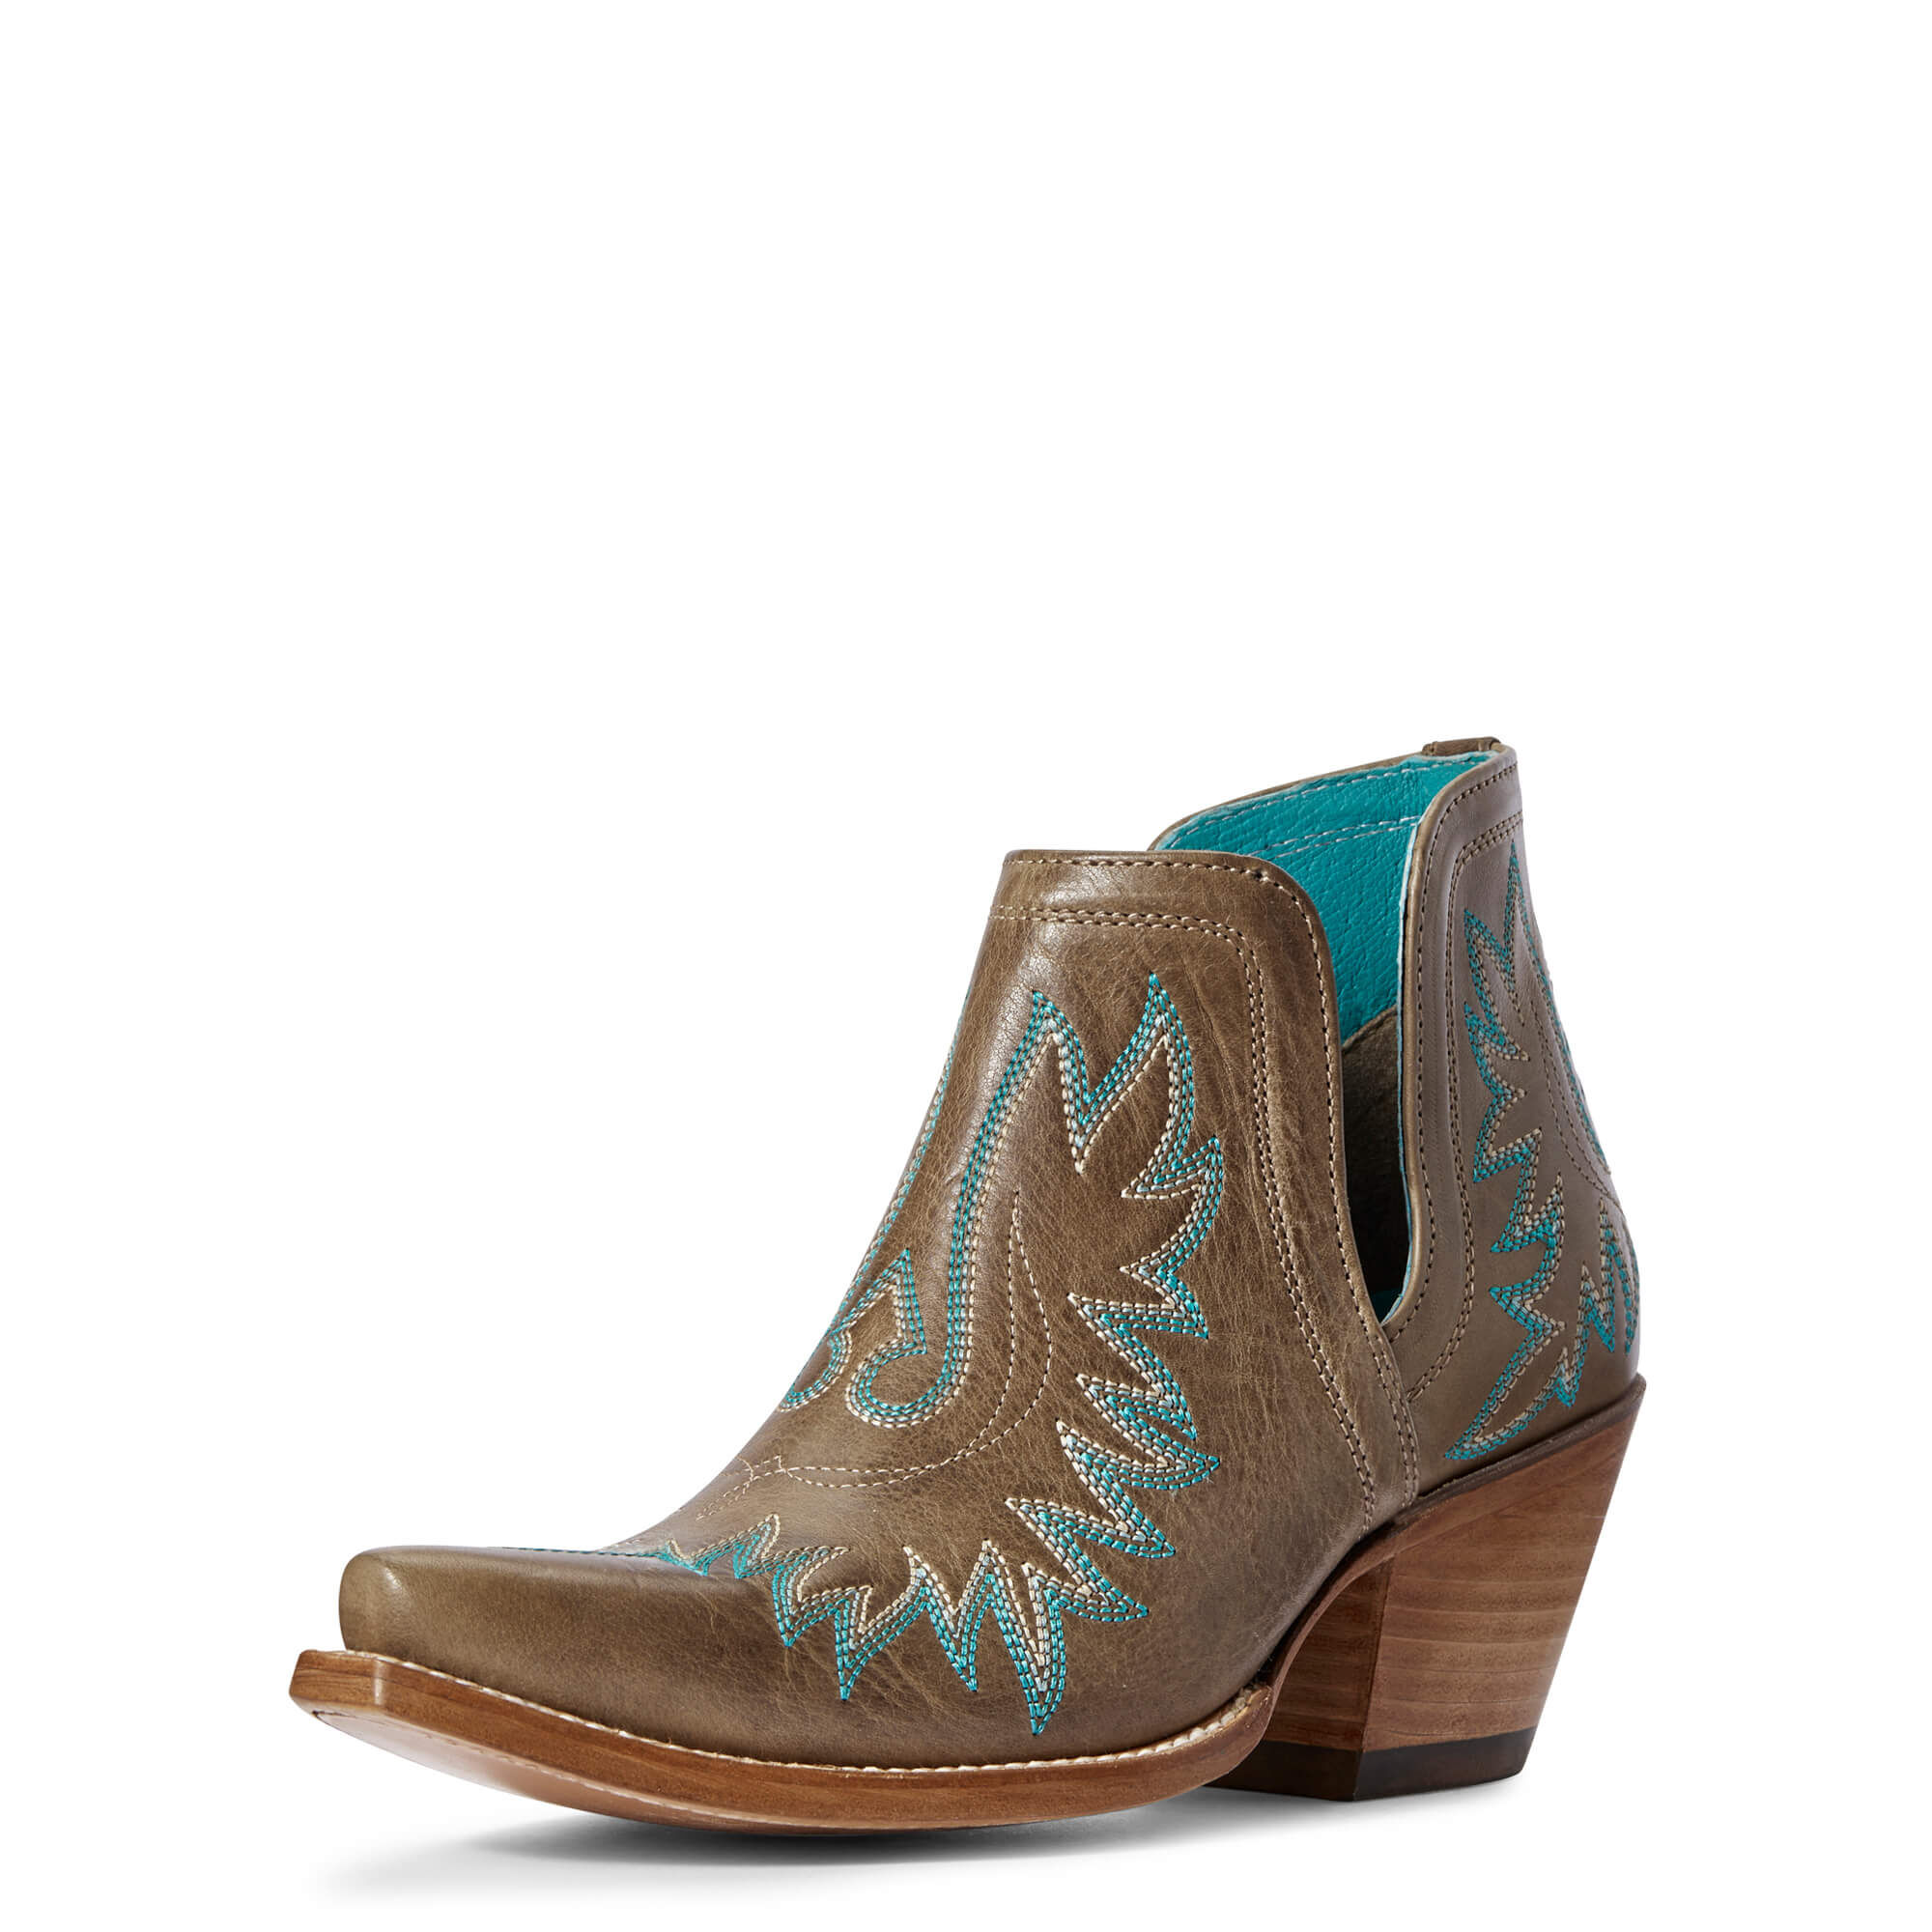 ariat women's boots clearance